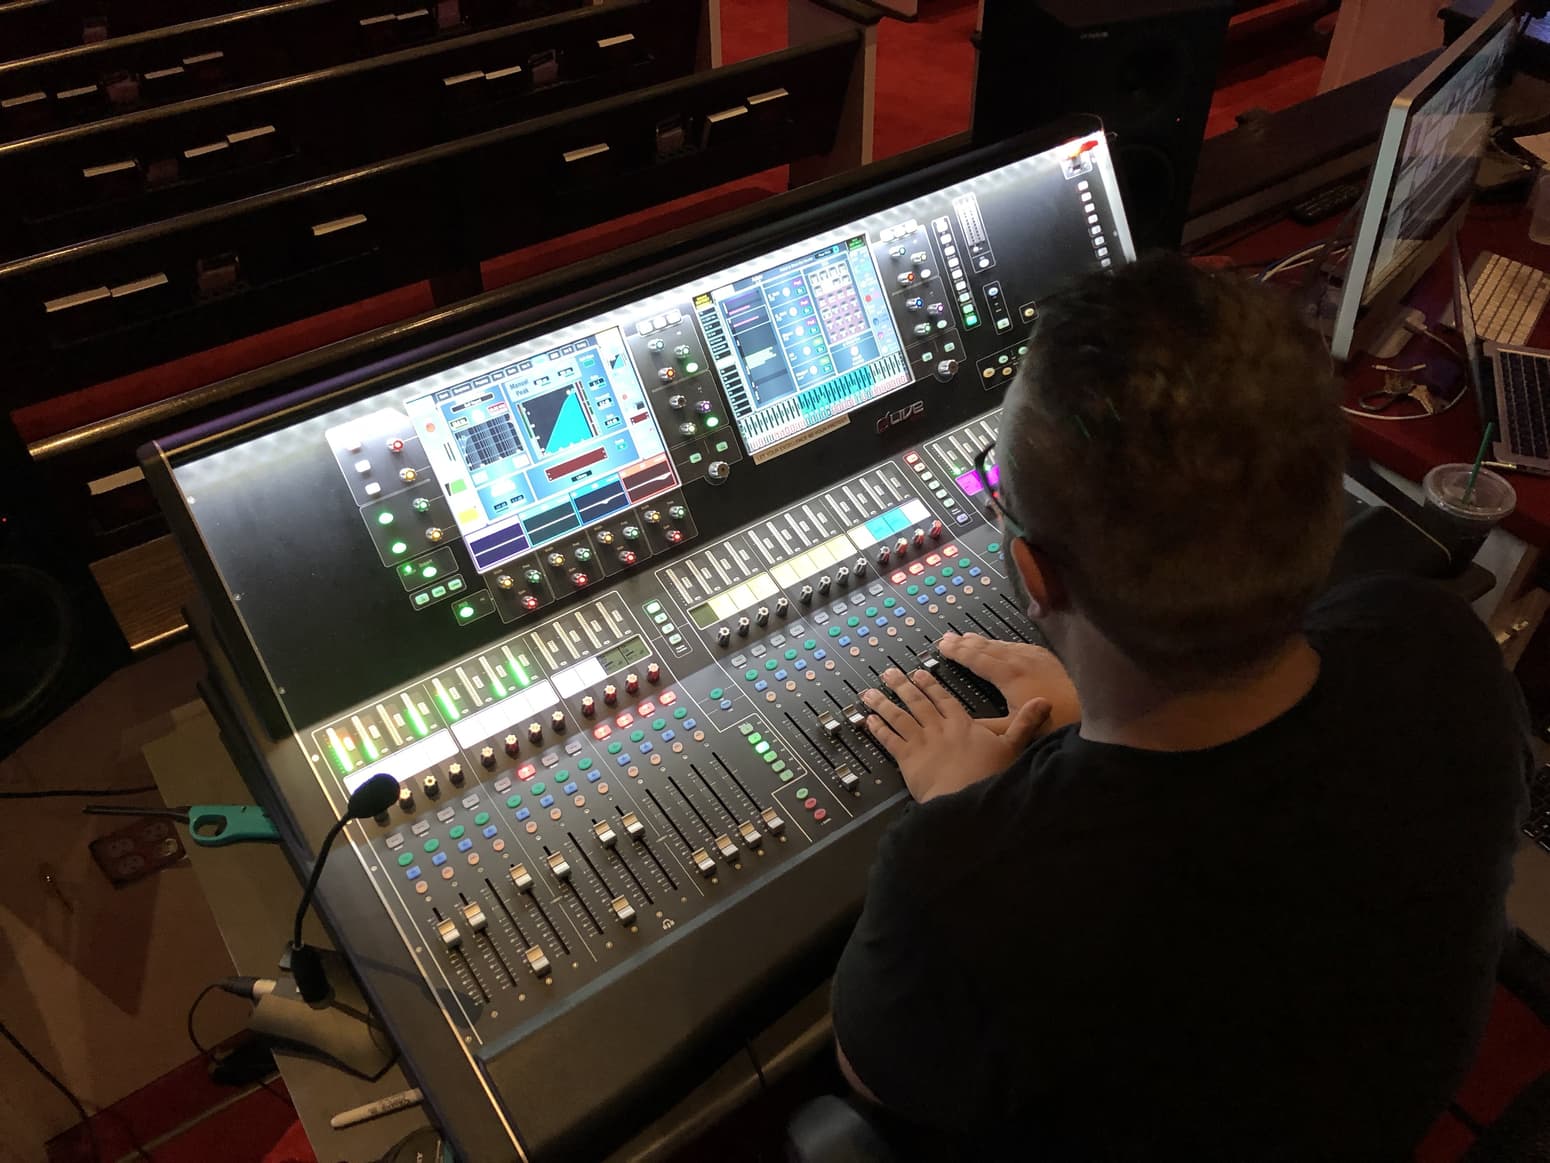 AVL sound is no problem with the right sound design equipment, like this sound board.